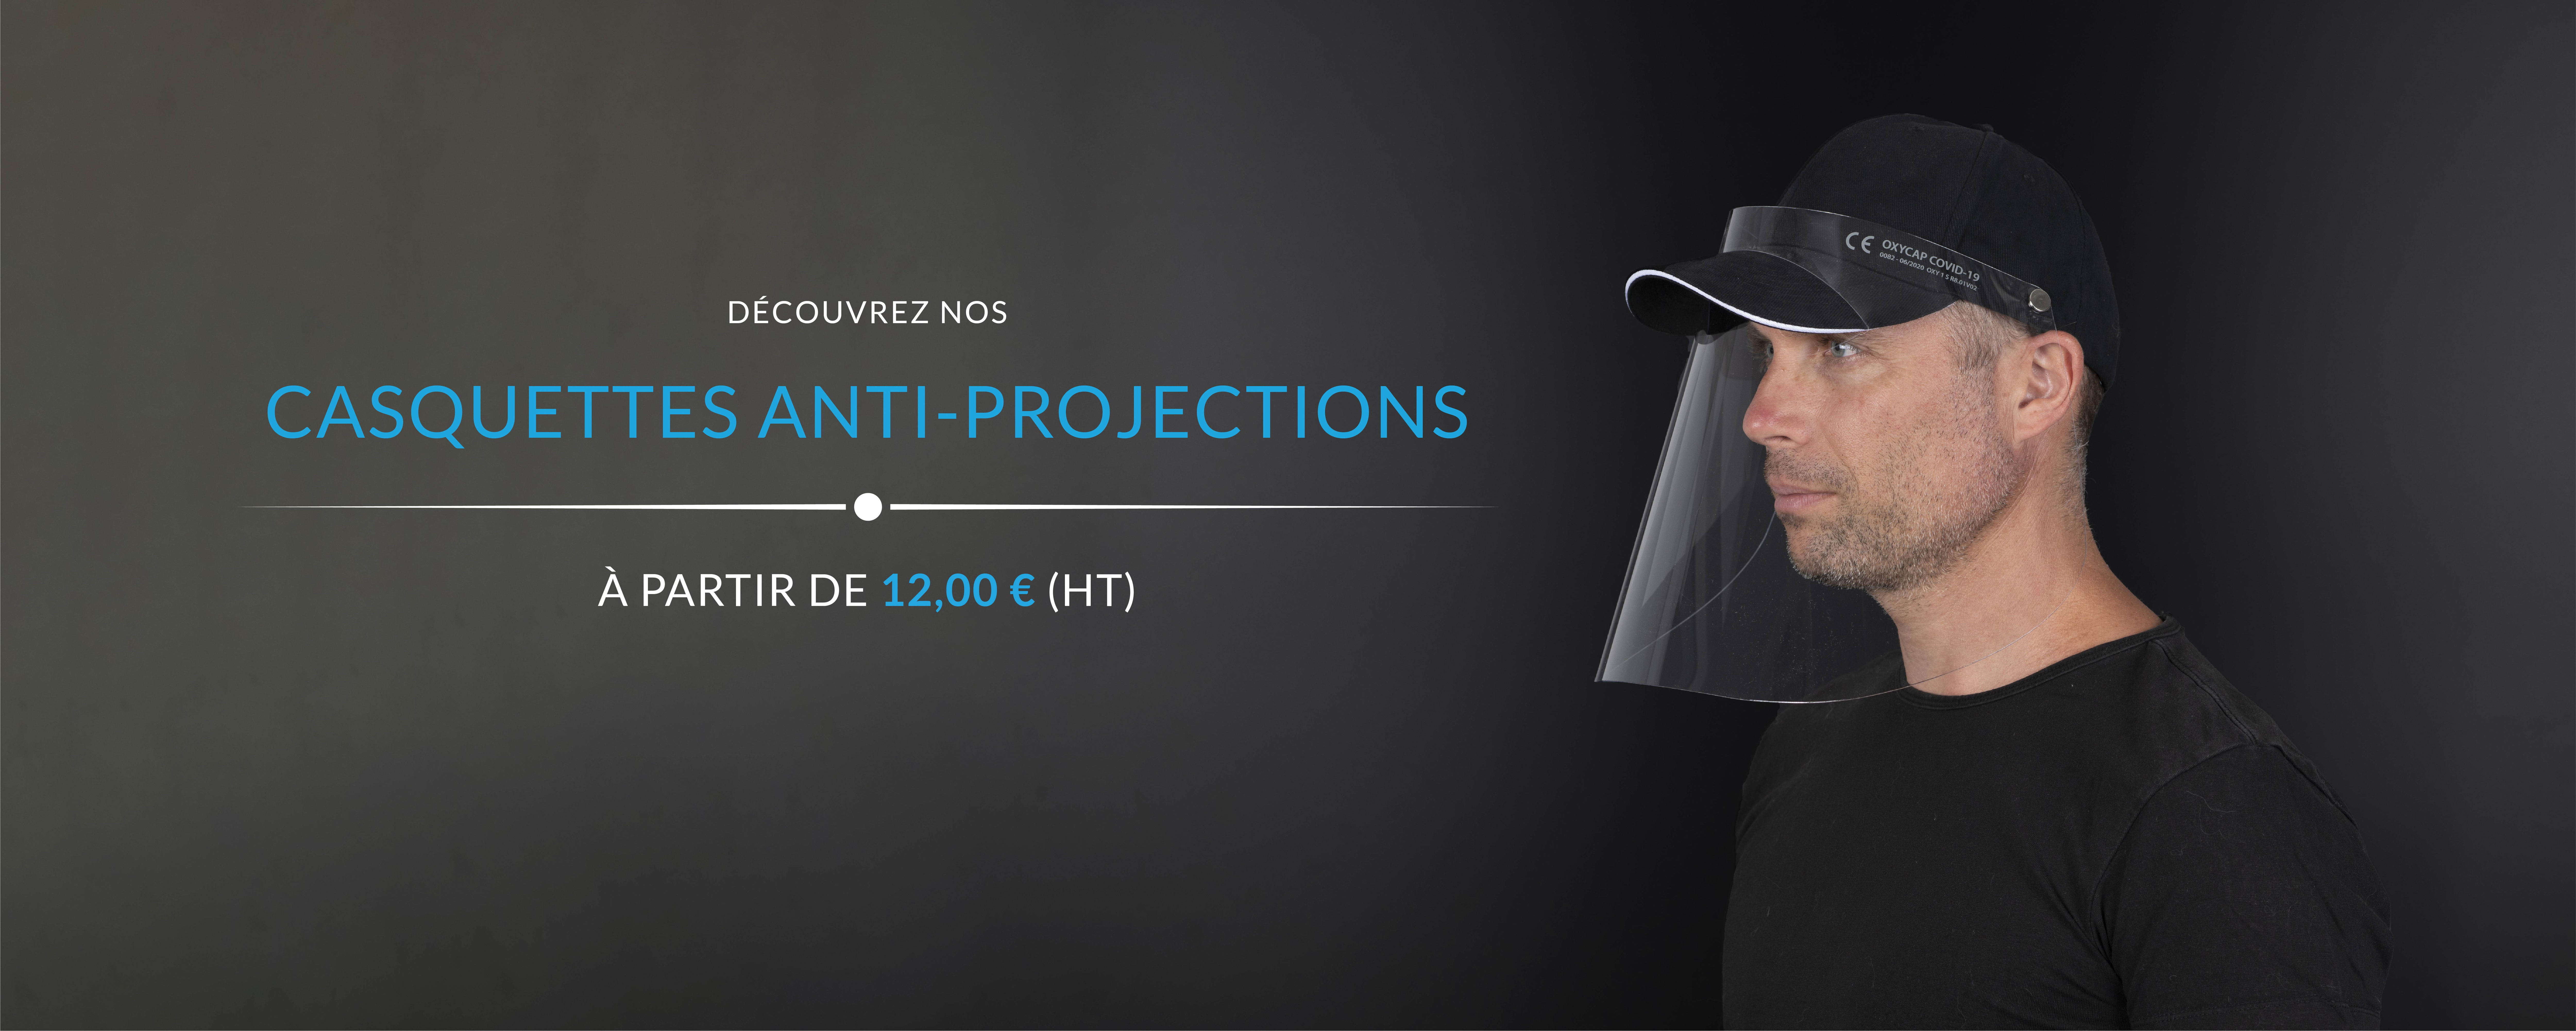 Casquettes antiprojections